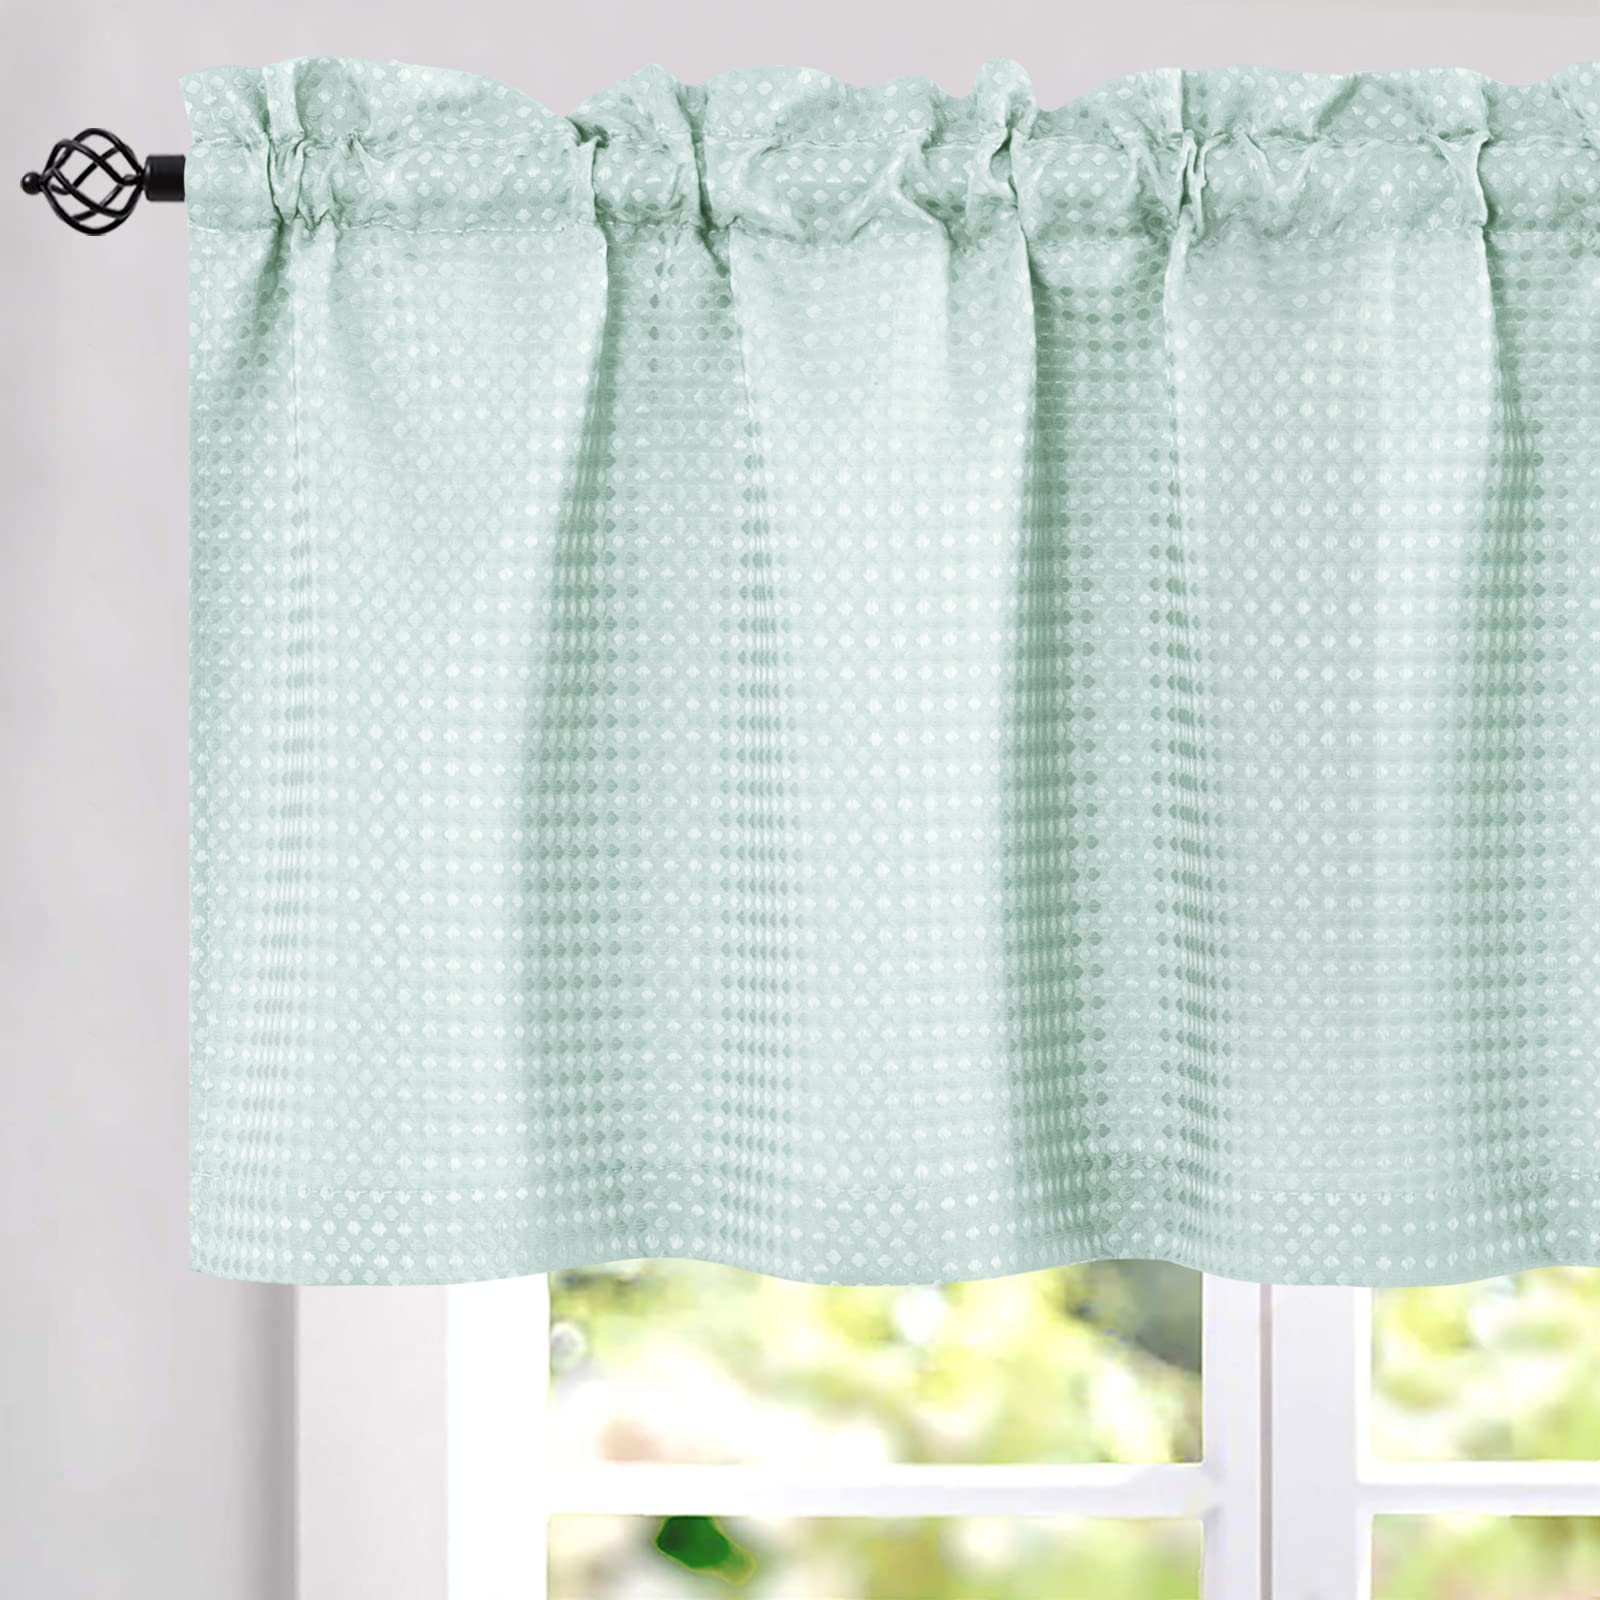 Book Cover Lazzzy Teal Valances for Windows Kitchen Curtains Waffle Weave Textured Valance for Living Room Bedroom Bathroom Half Short Drapes Rod Pocket Home Decoration, 60